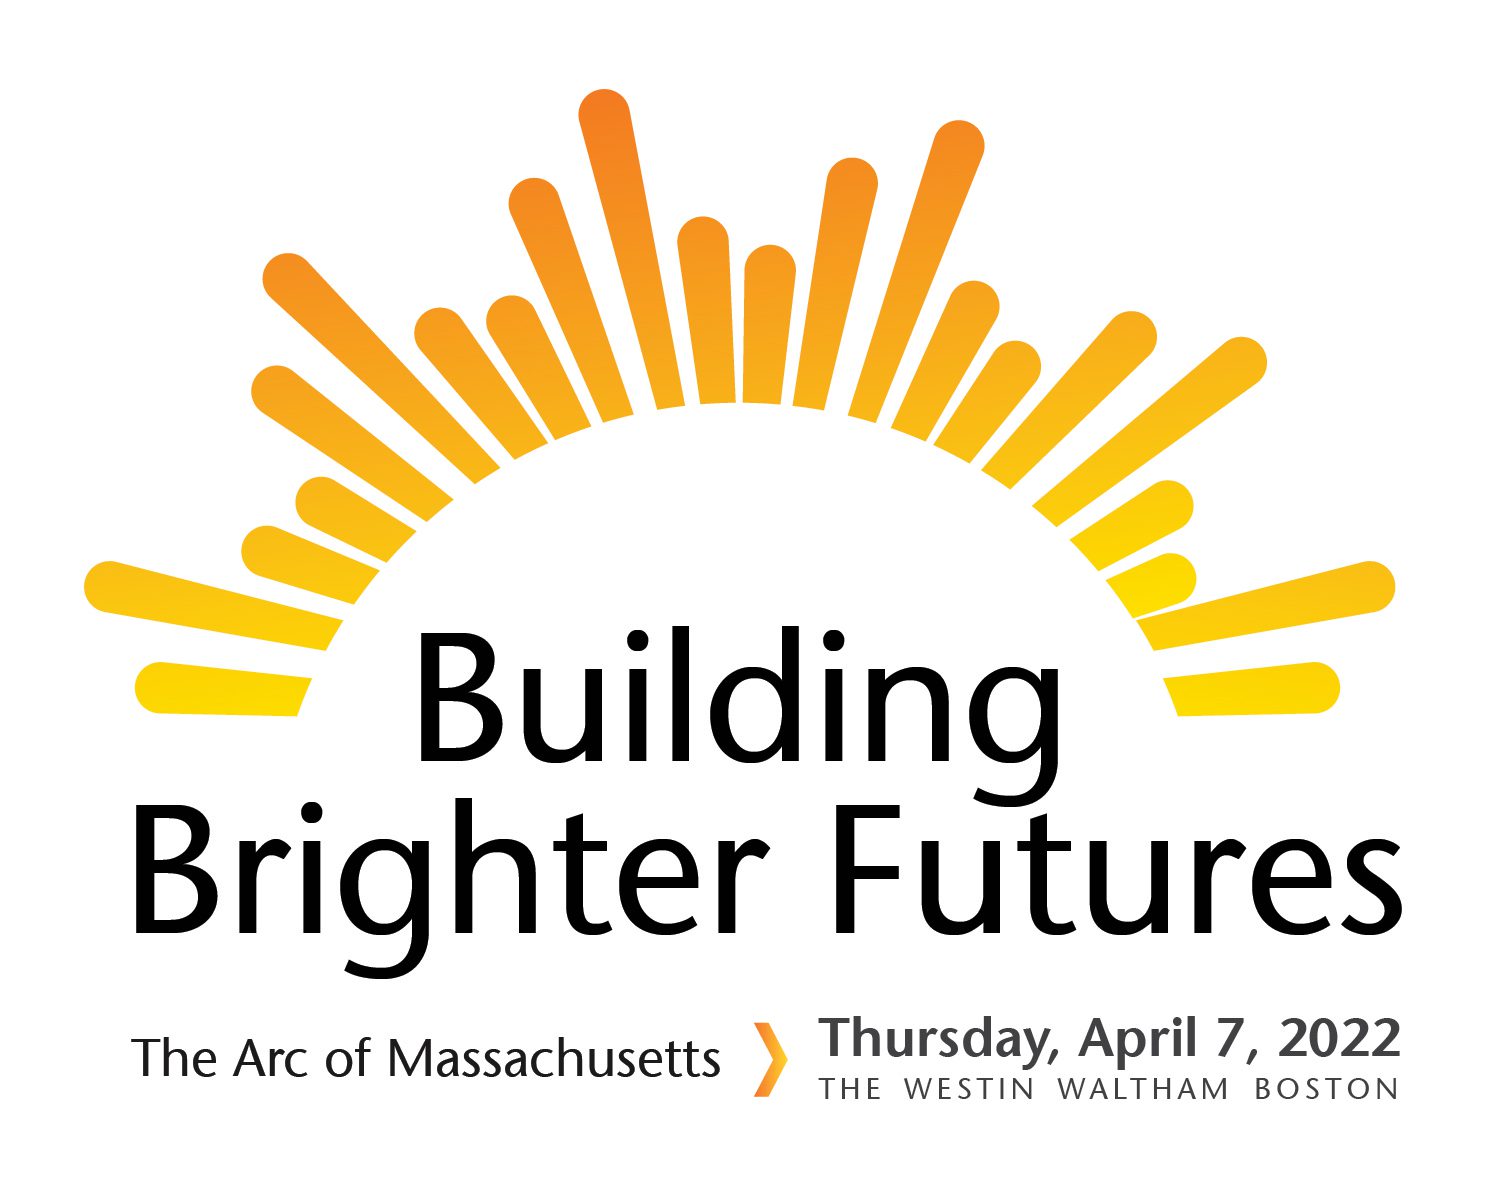 The Arc of Massachusetts Building Brighter Futures Gala